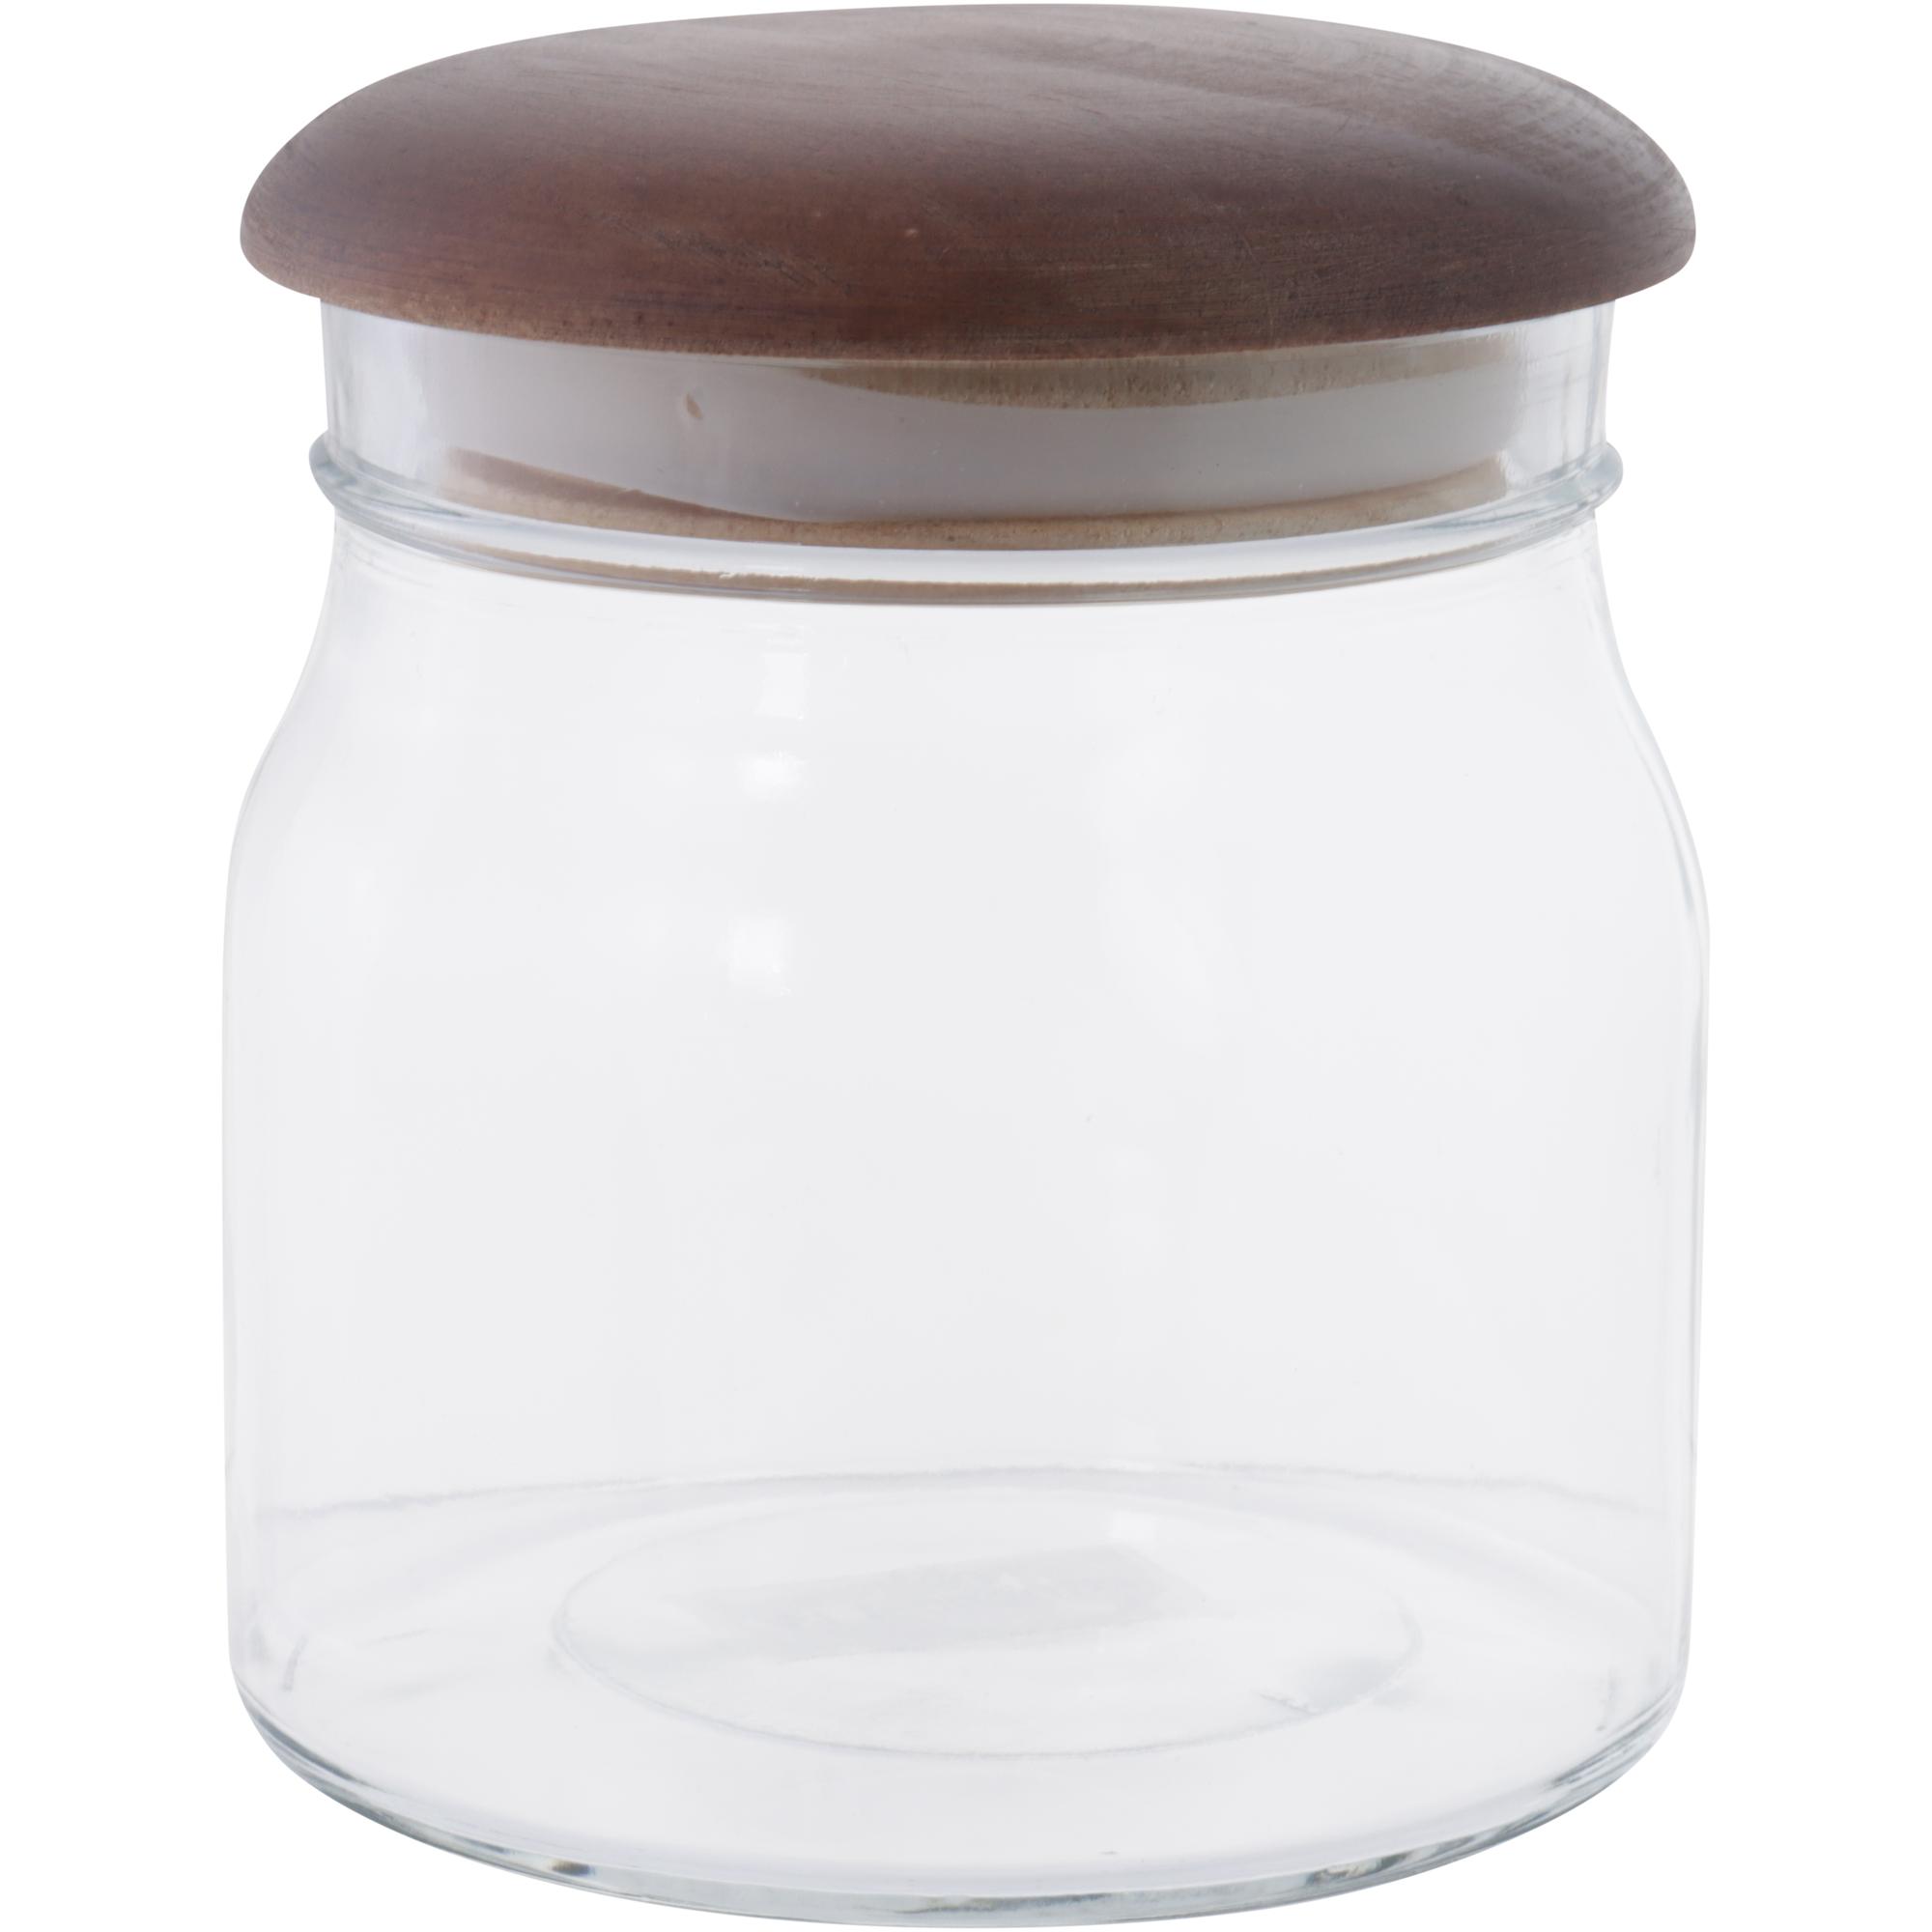 Gass storage jar with wooden lid - 411-065094